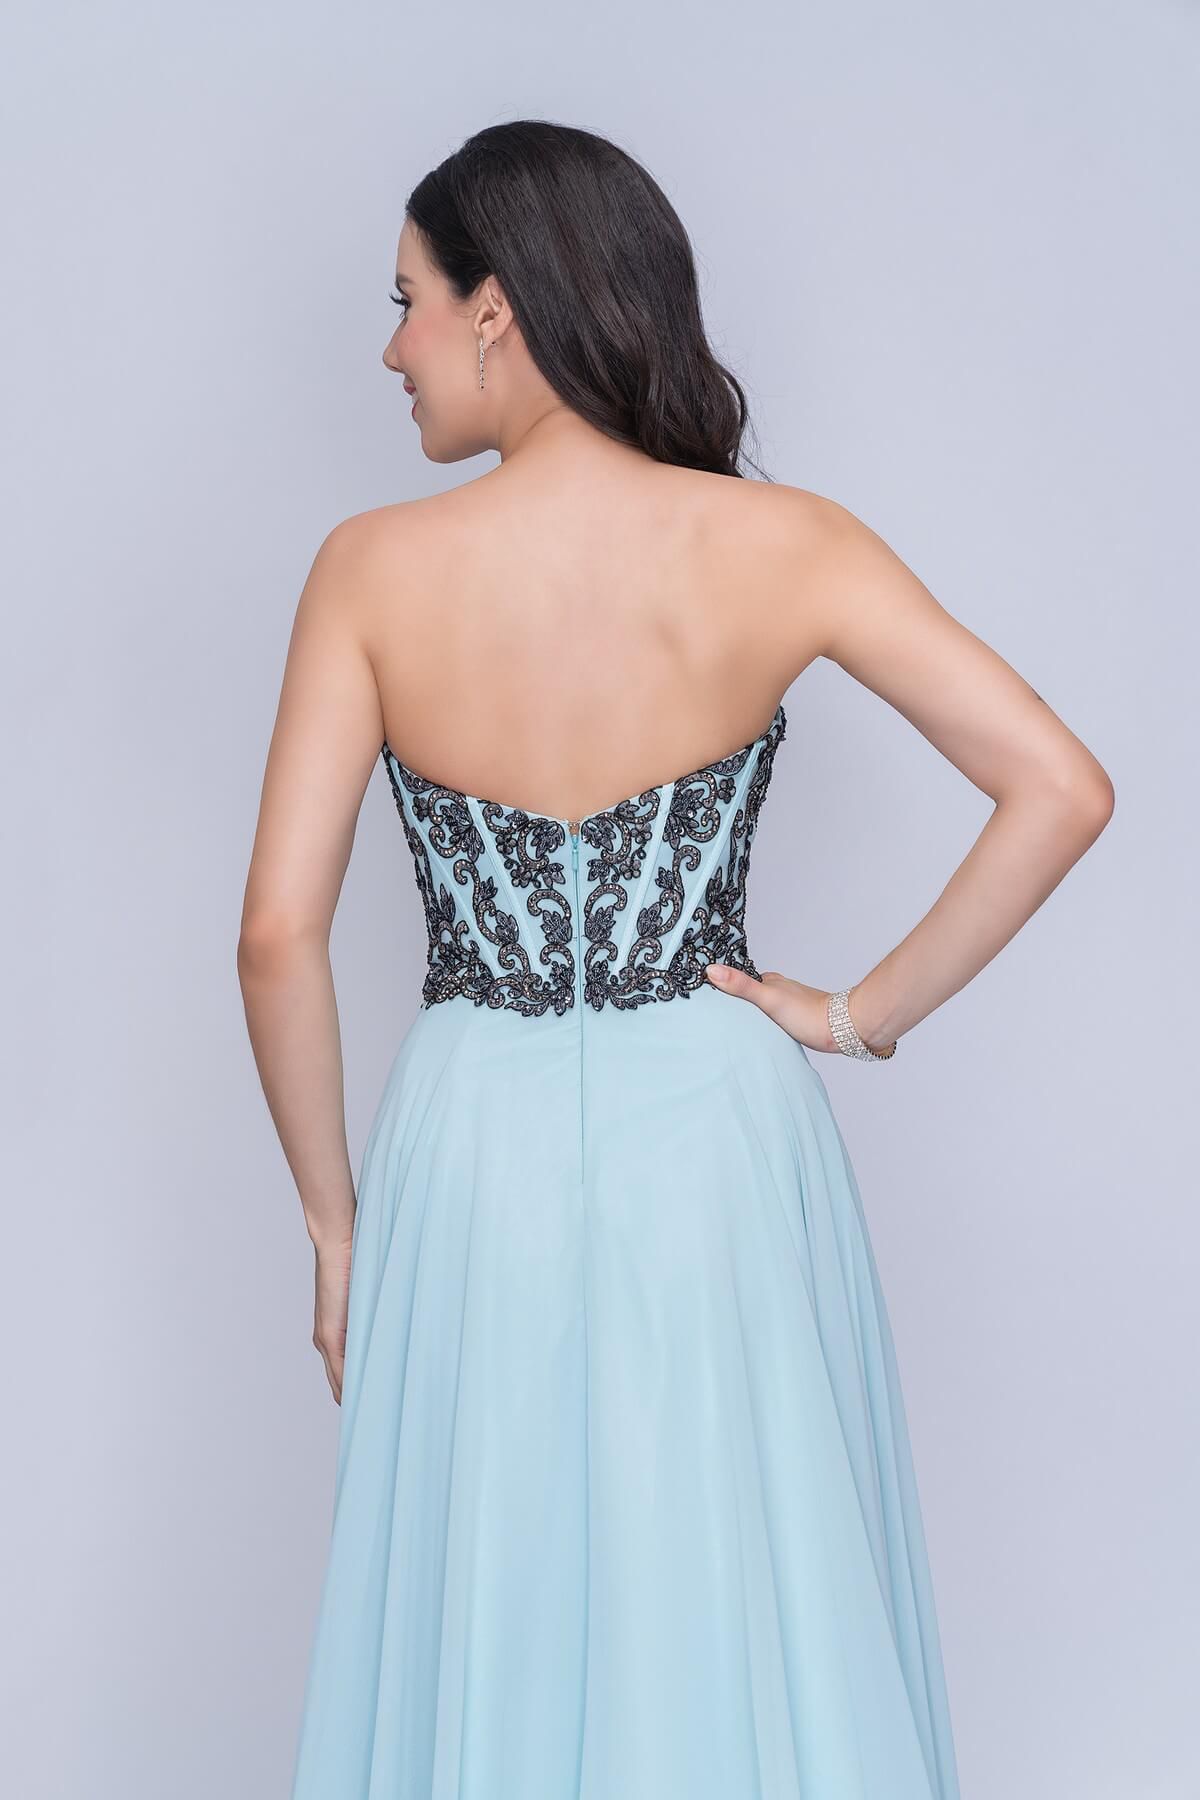 Style 3140 Nina Canacci Size 0 Prom Strapless Light Blue A-line Dress on Queenly